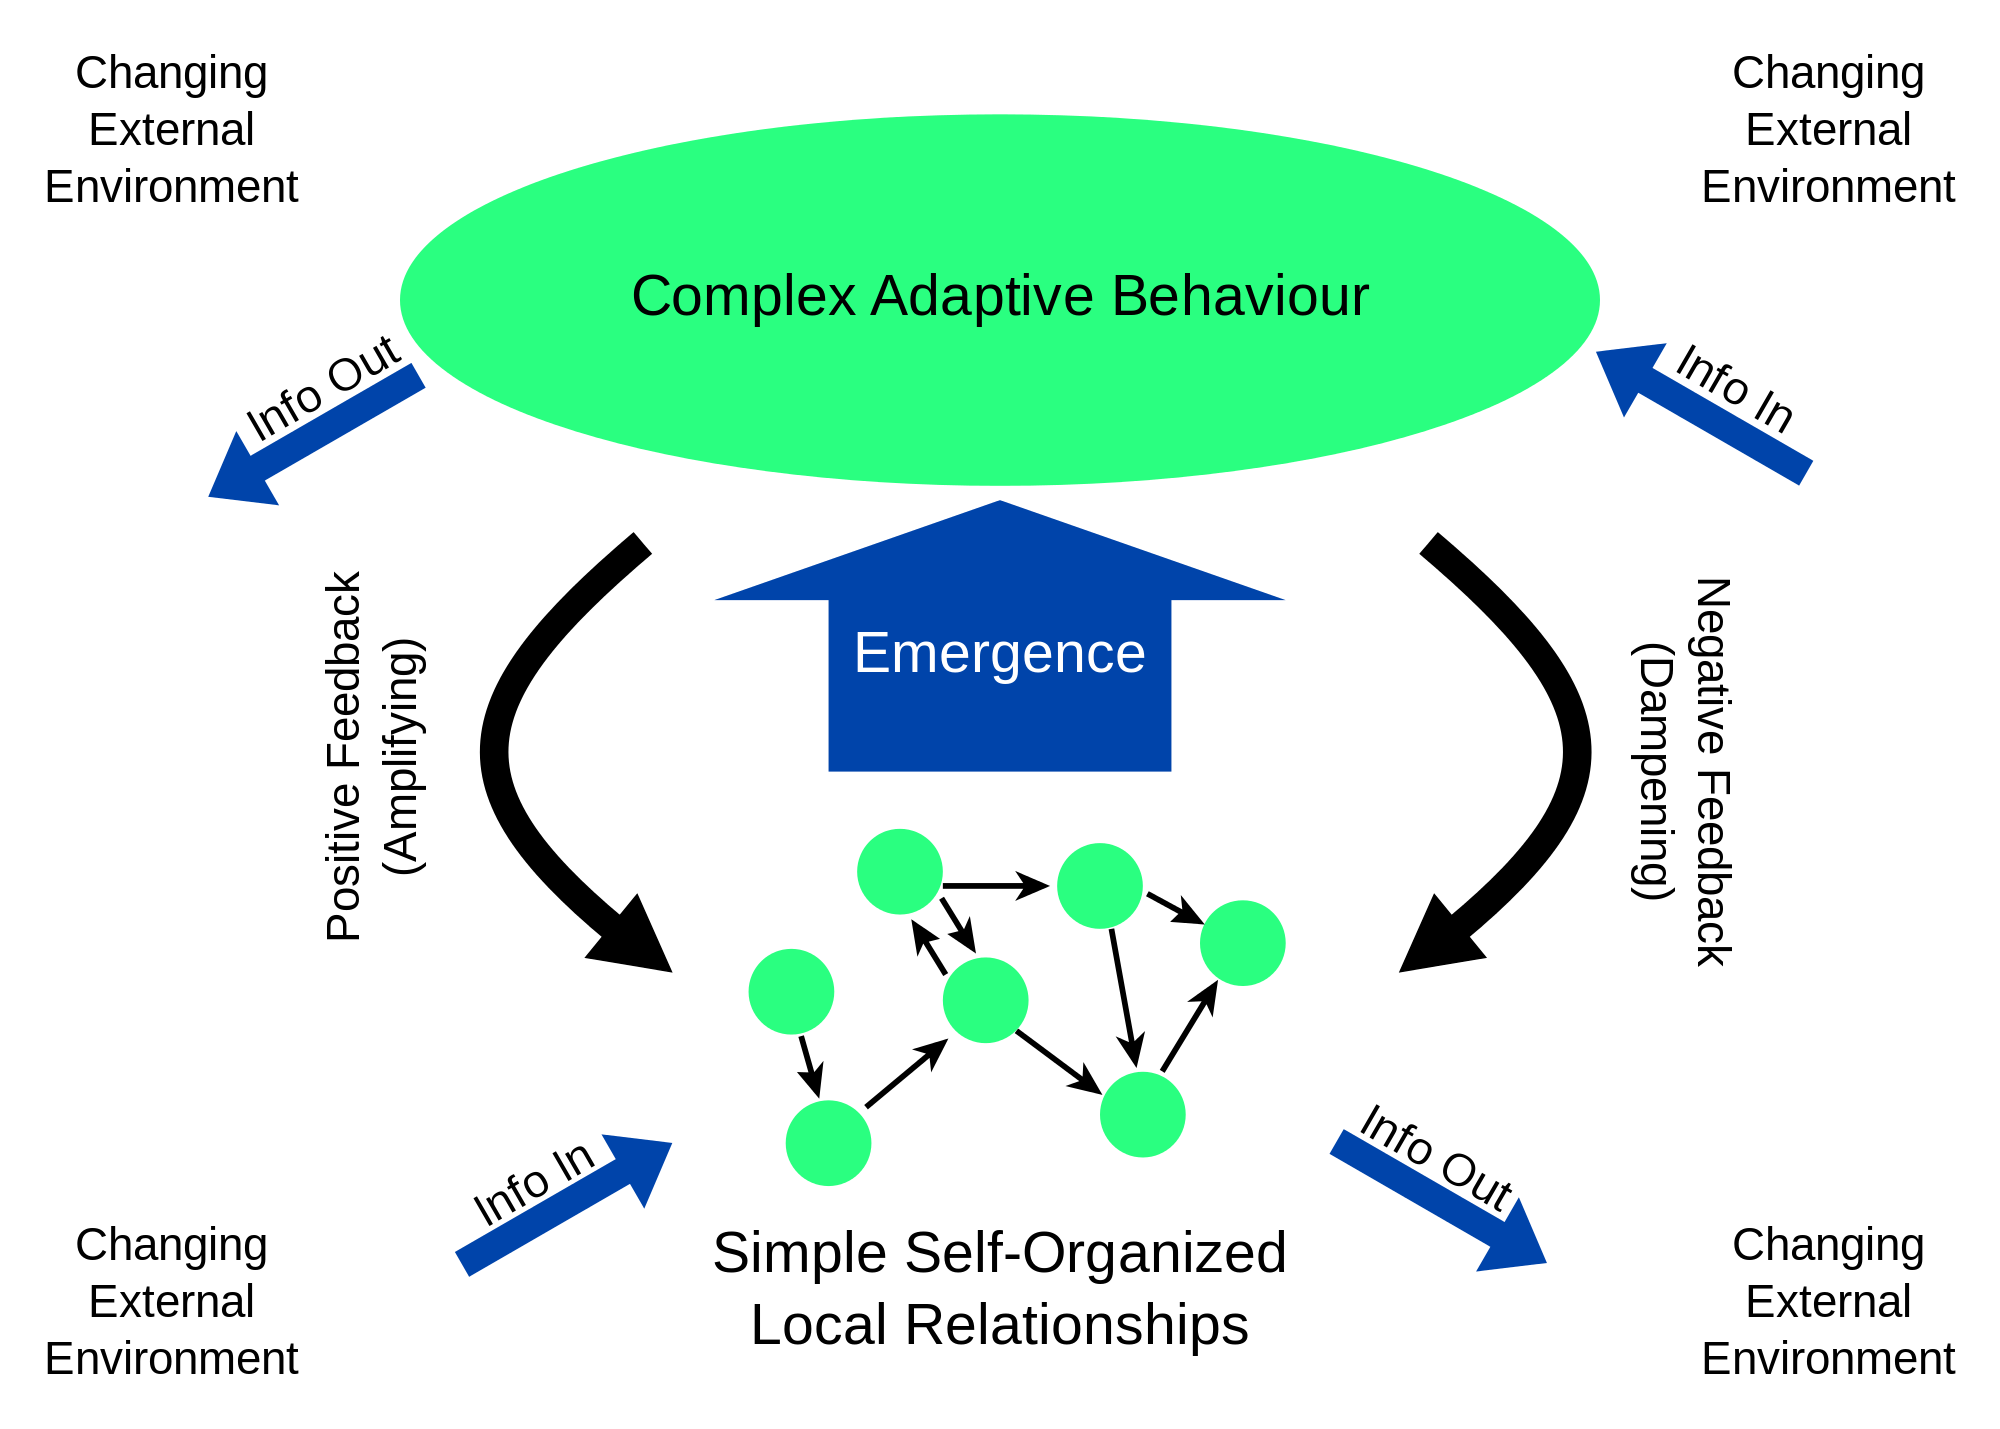 Human beings are complex adaptive systems chart